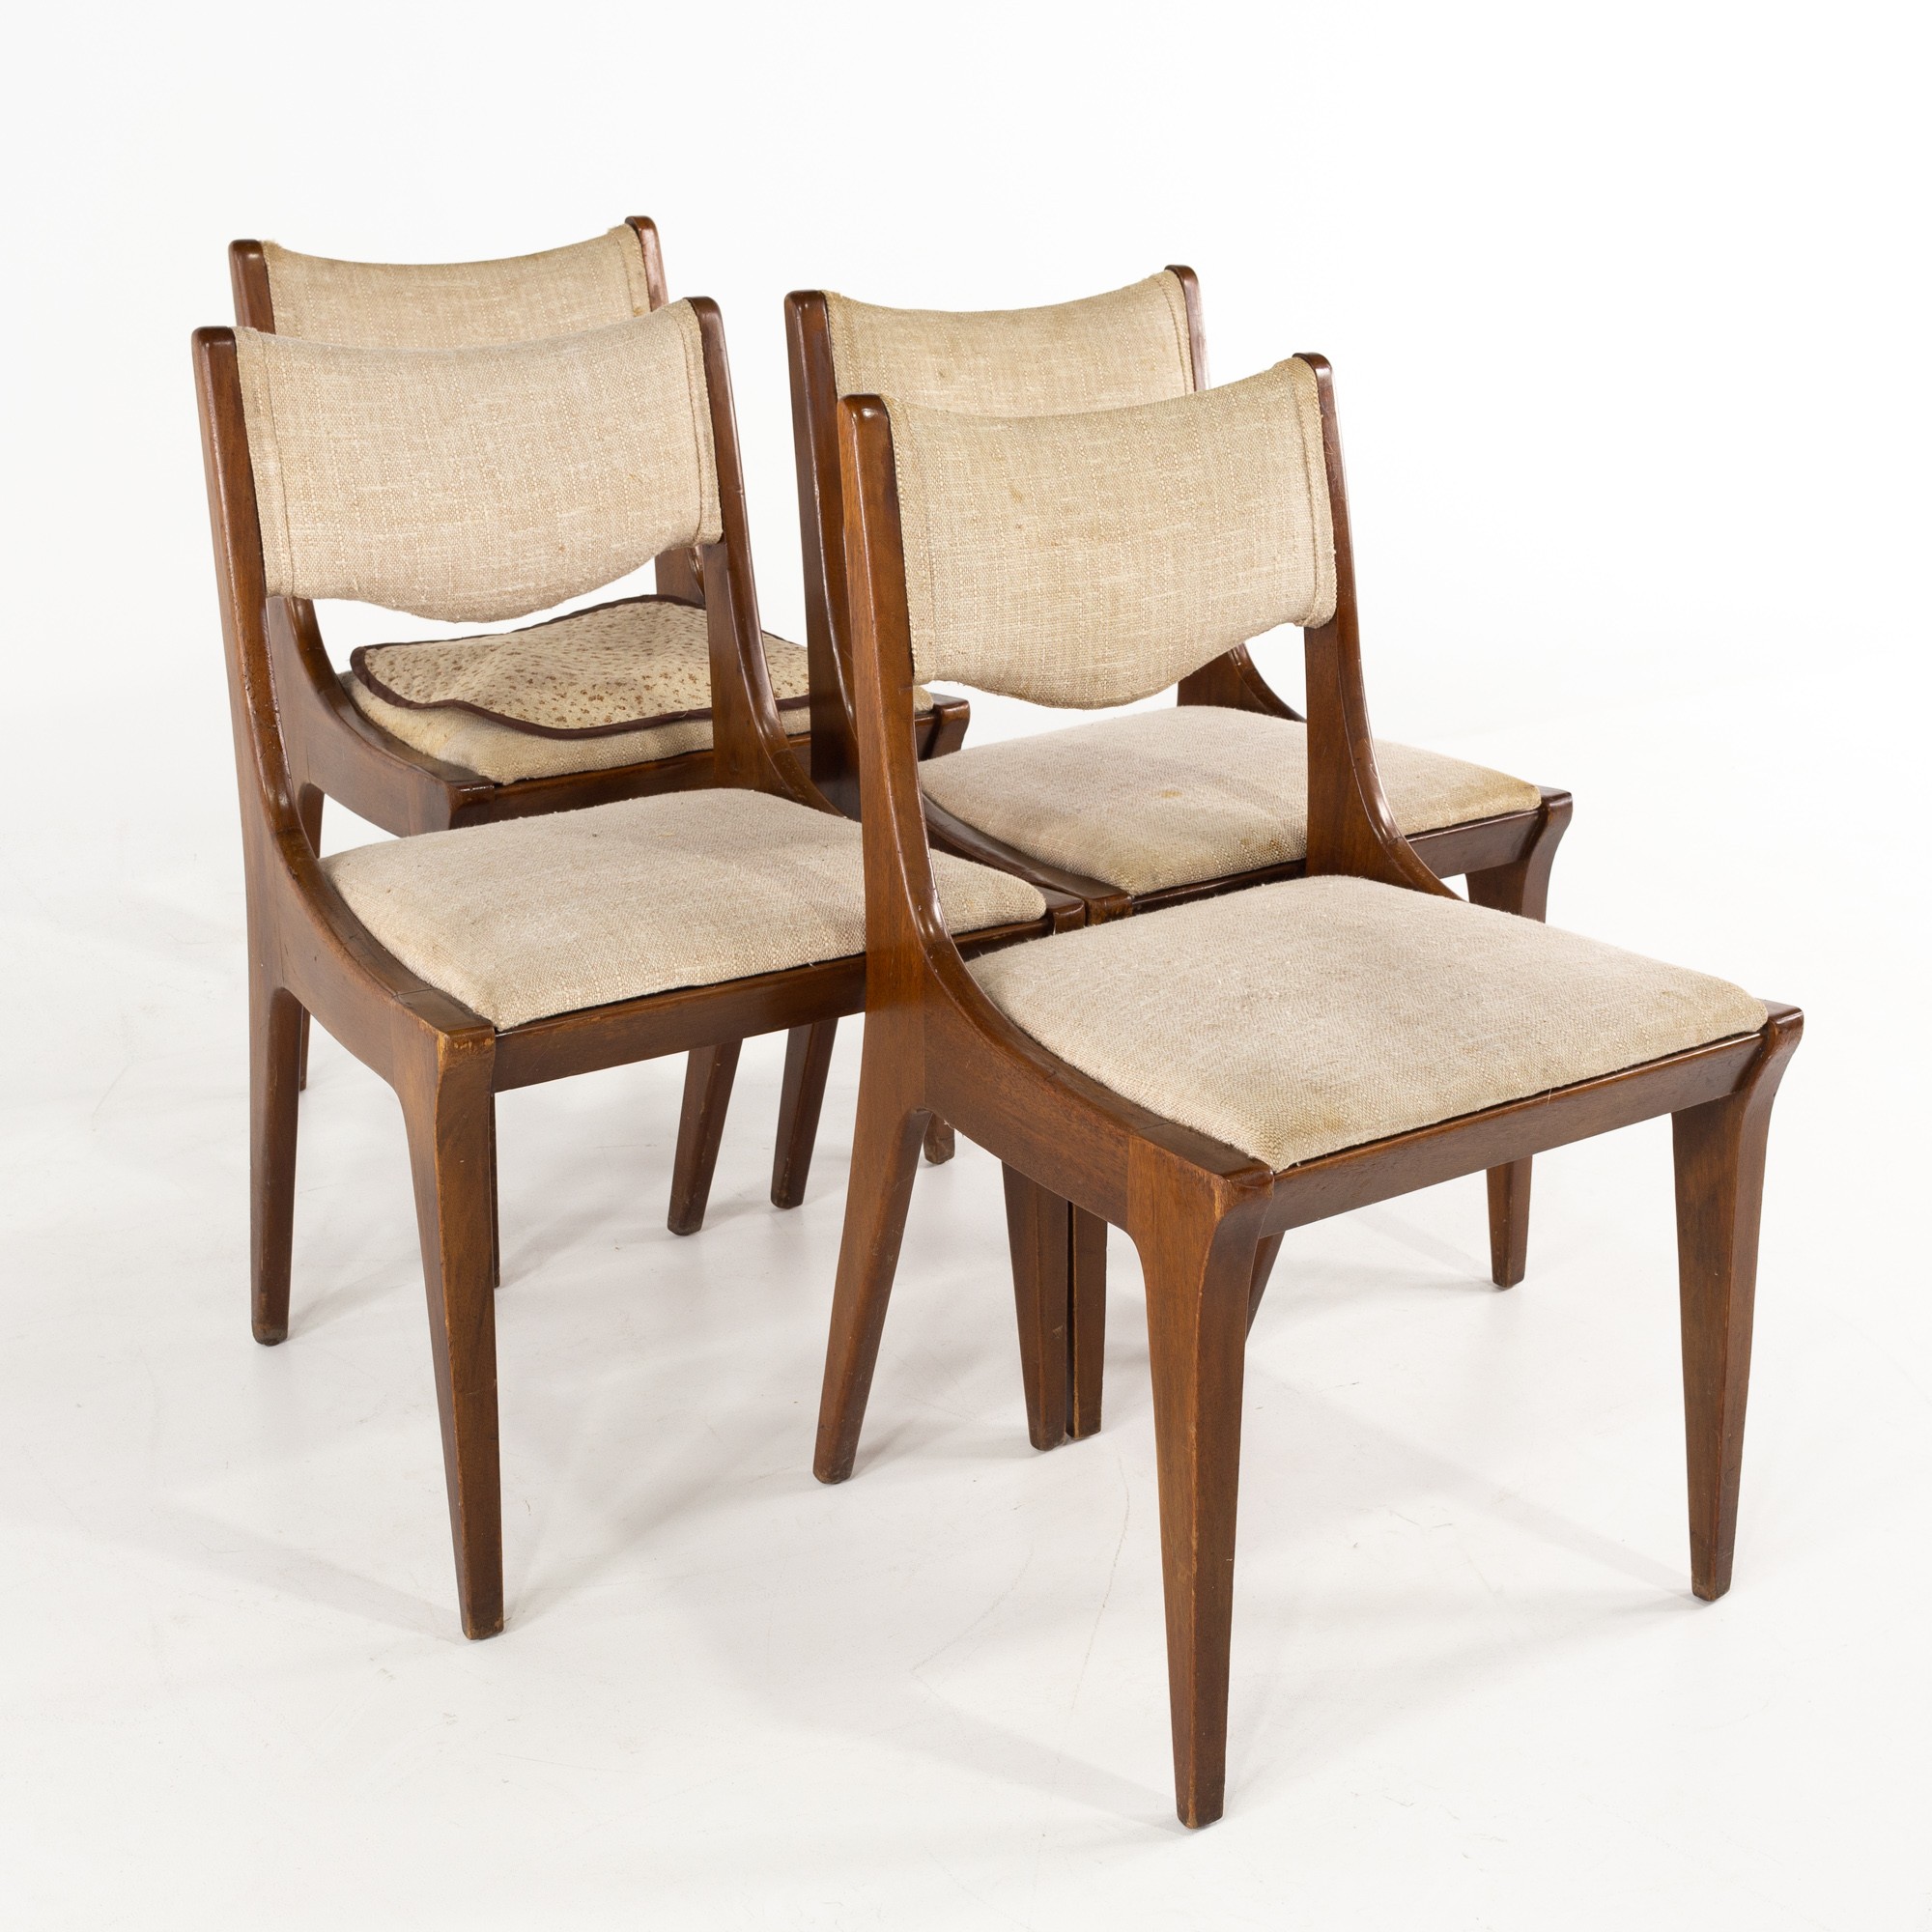 Drexel Dateline Mid Century Dining Chairs - Set of Four